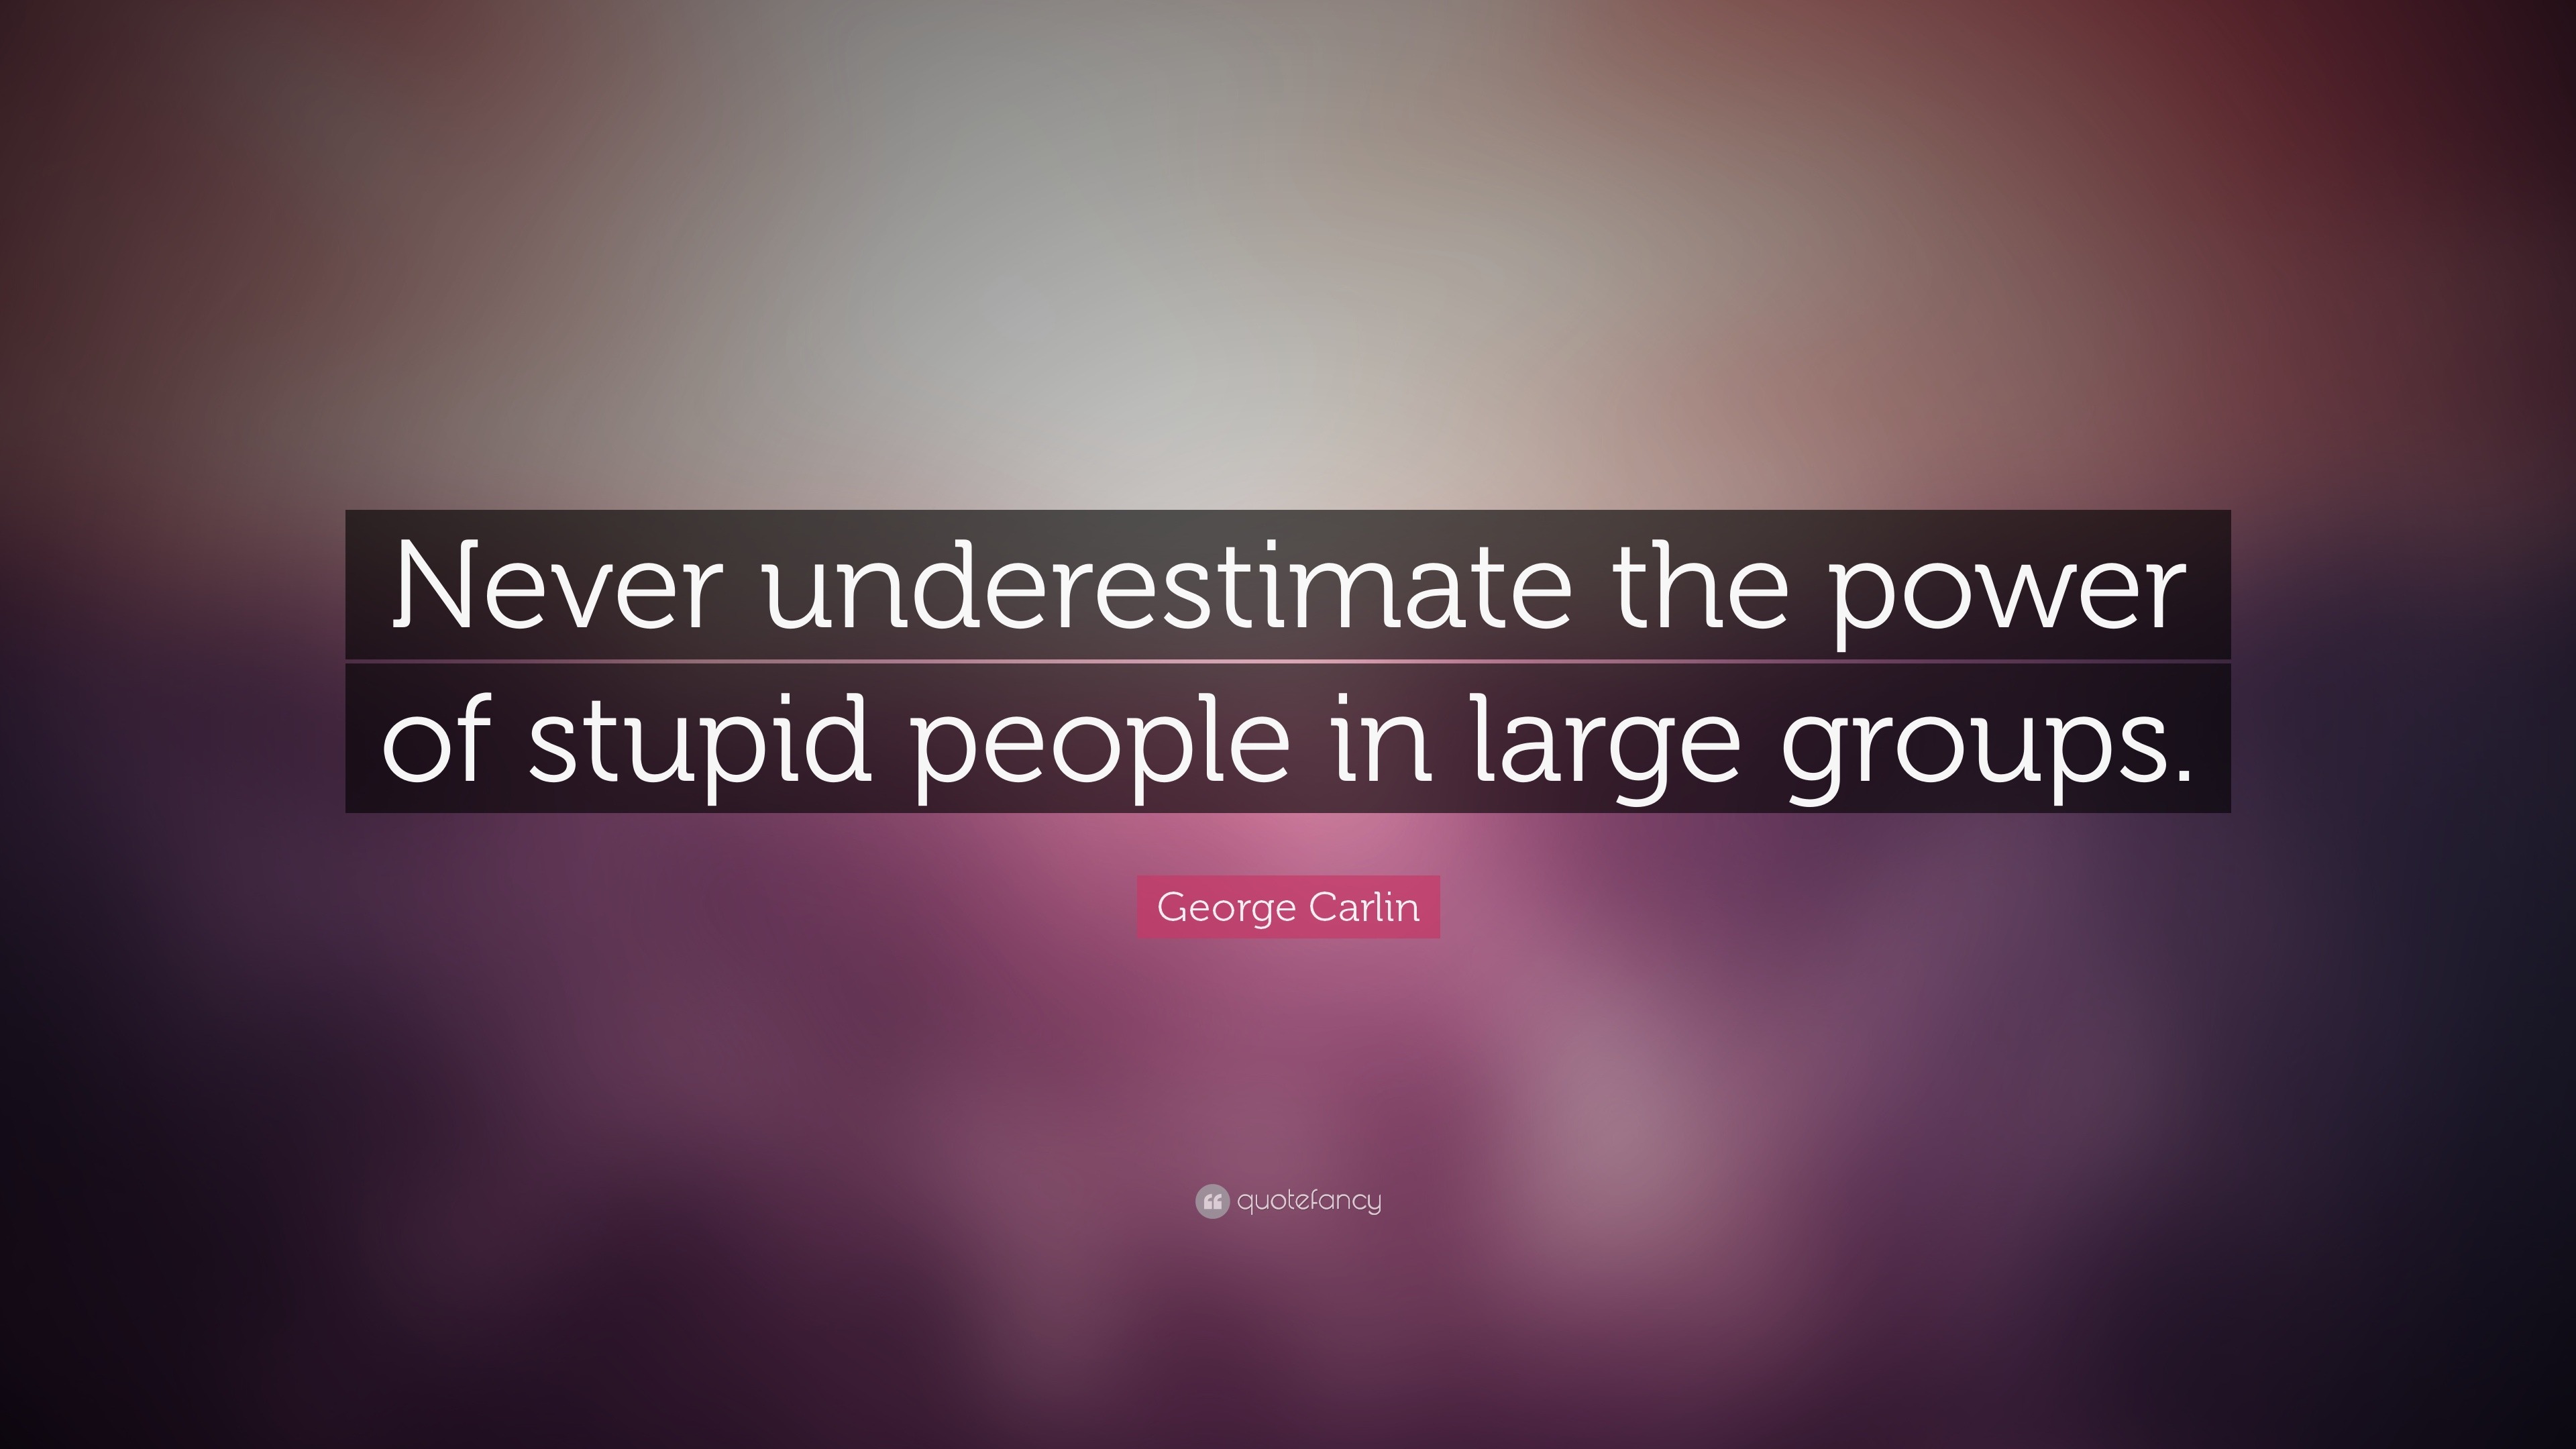 George Carlin Quote: “Never underestimate the power of stupid people in